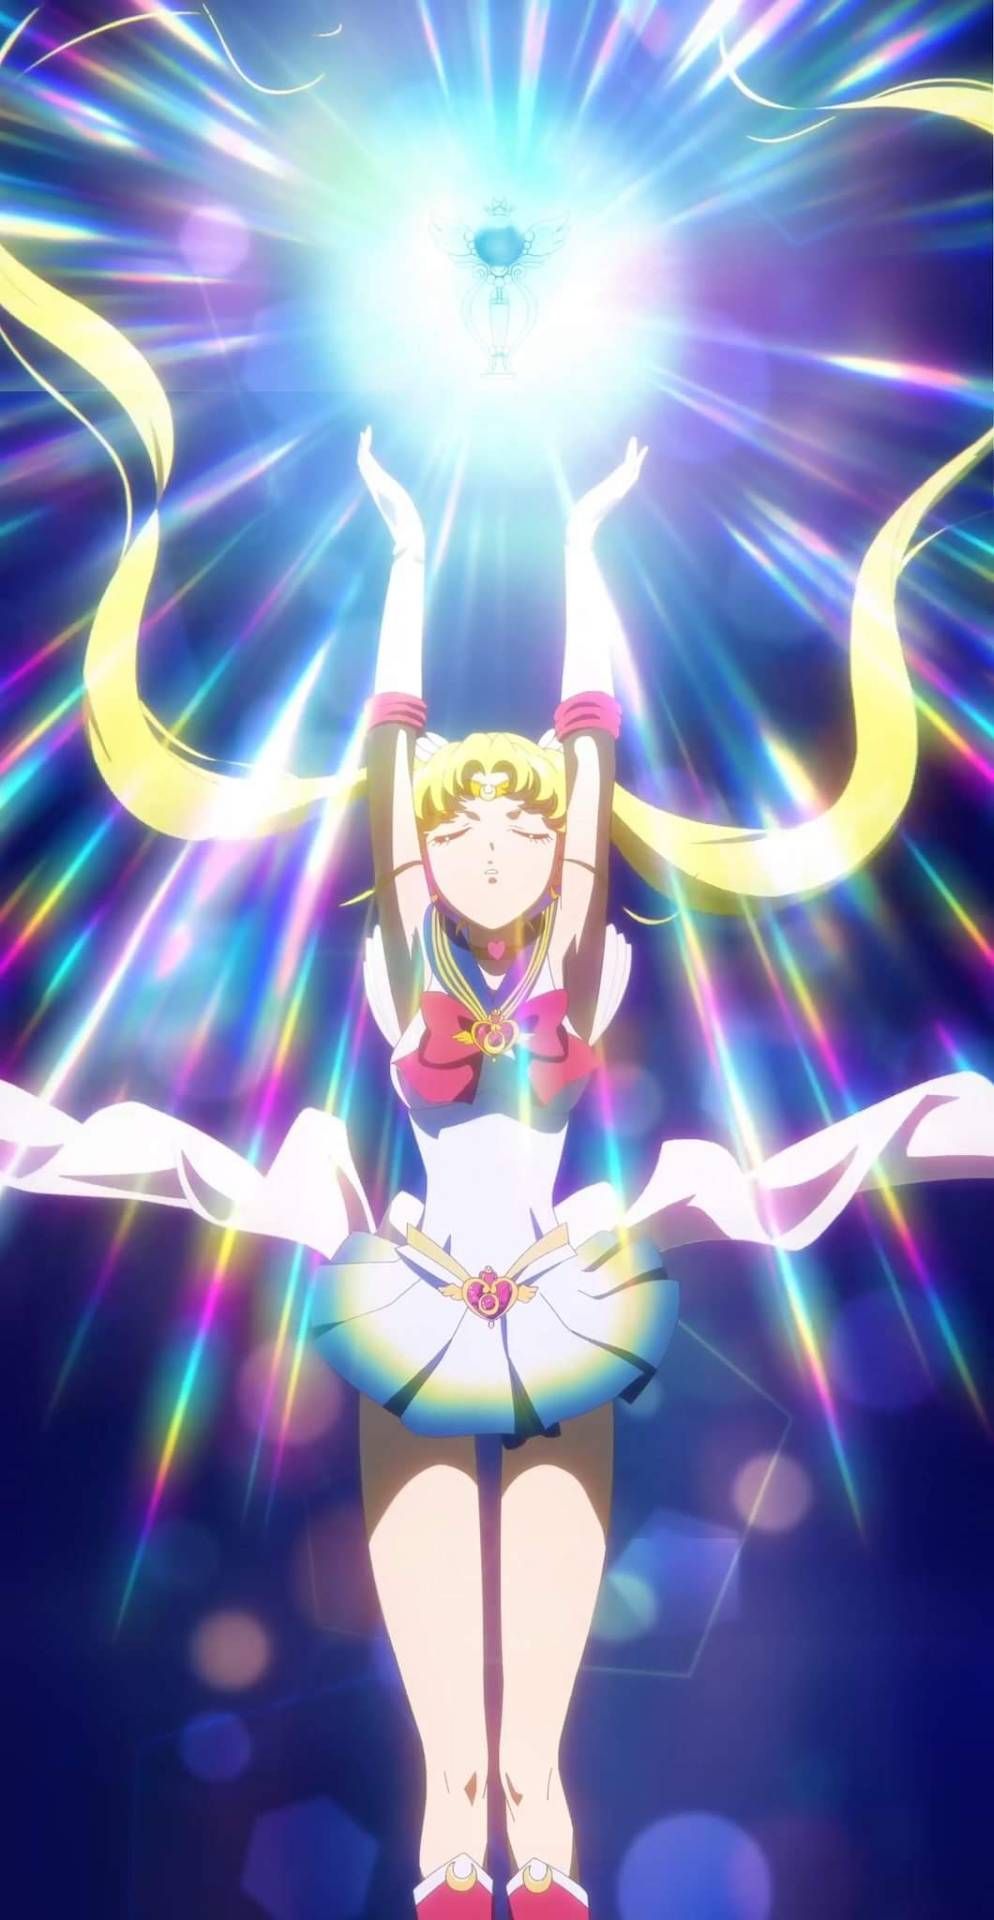 Tagged sailor moon eternal. All I Want is You. Sailor moon manga, Sailor moon usagi, Sailor moon aesthetic